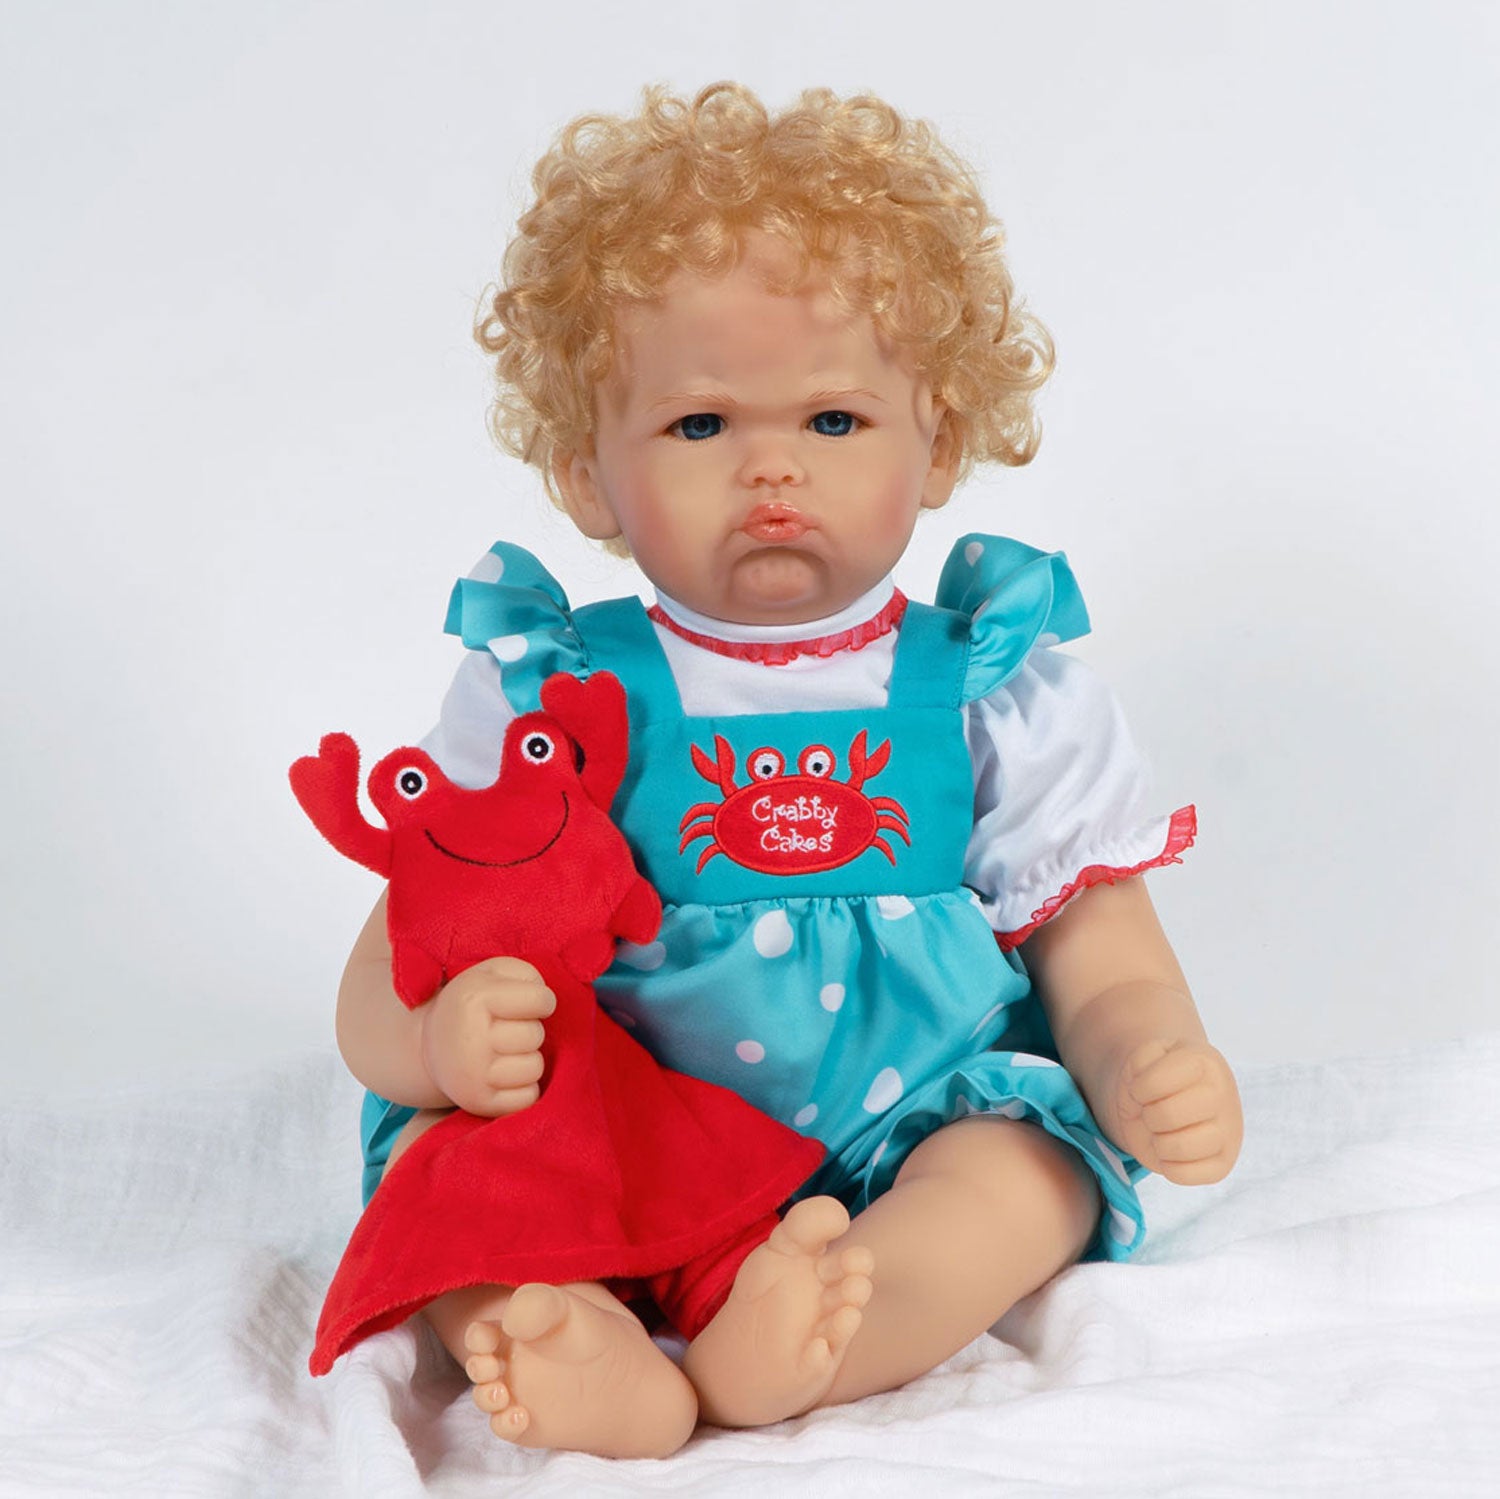 Paradise Galleries Crabby Cakes - Realistic Grumpy Toddler Girl Doll! 22 Inch Reborn Doll in GentleTouch Vinyl by Reborn Artist, Ping Lau.